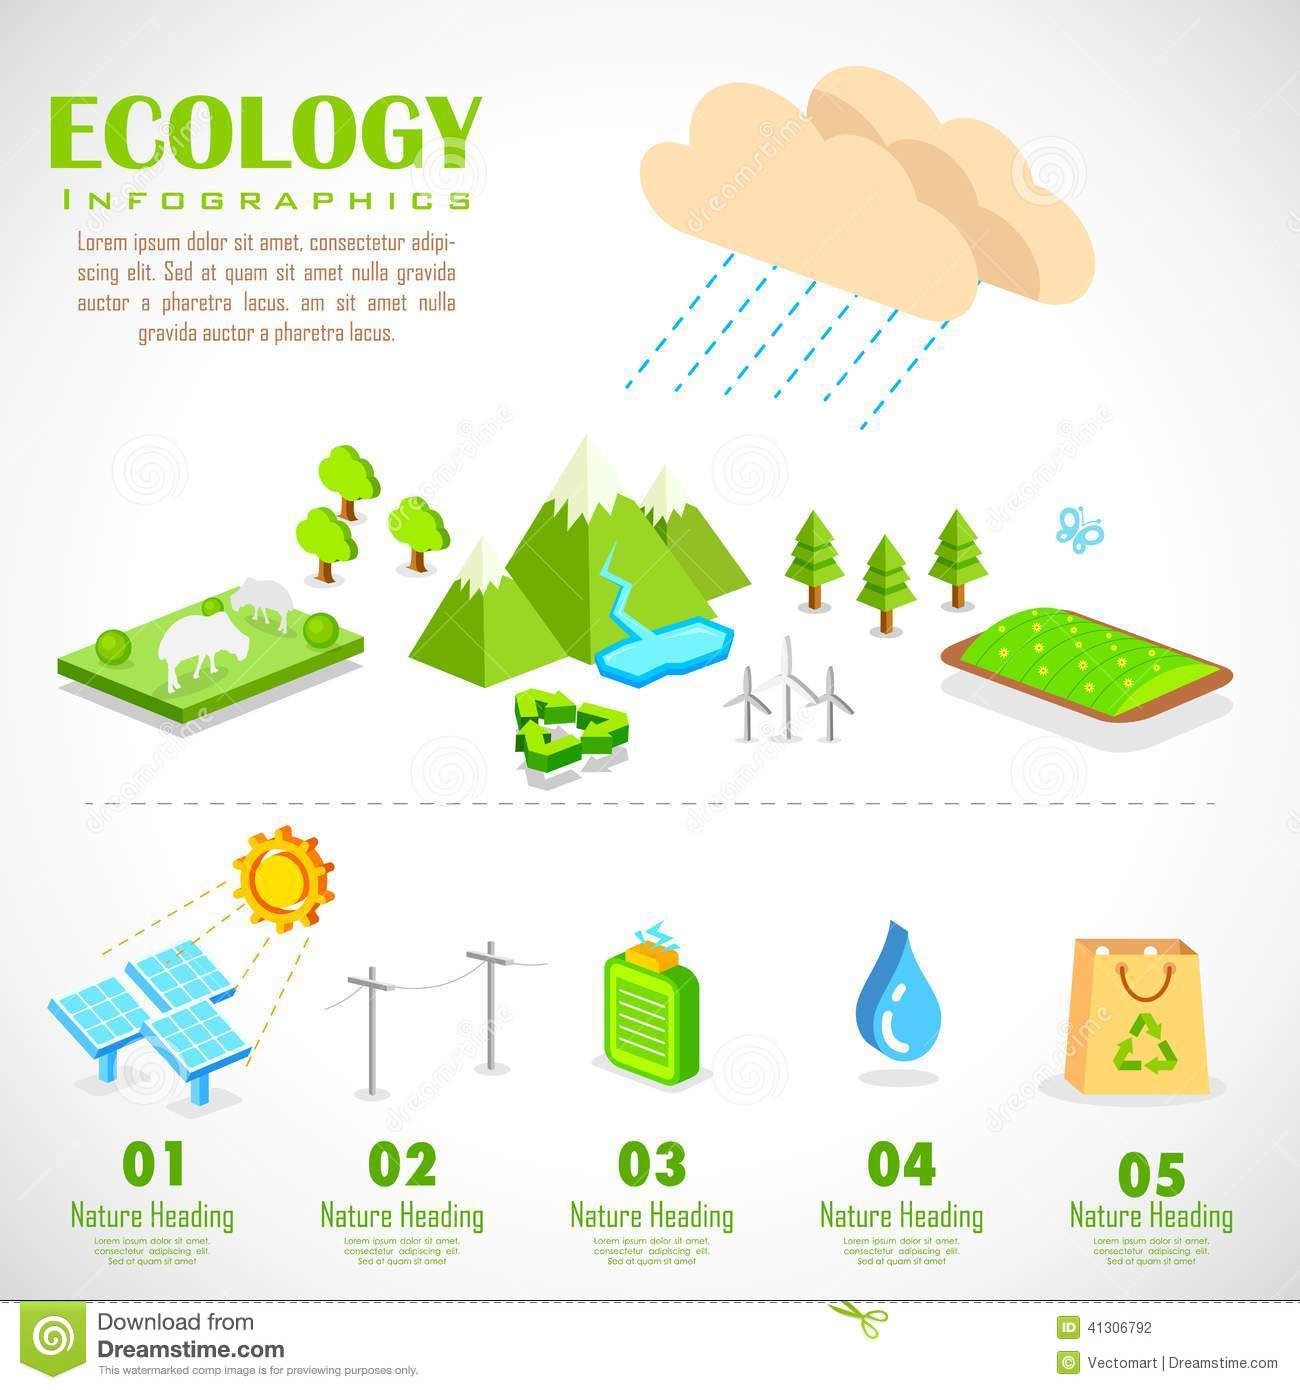 Things to know about Ecology | Visual.ly